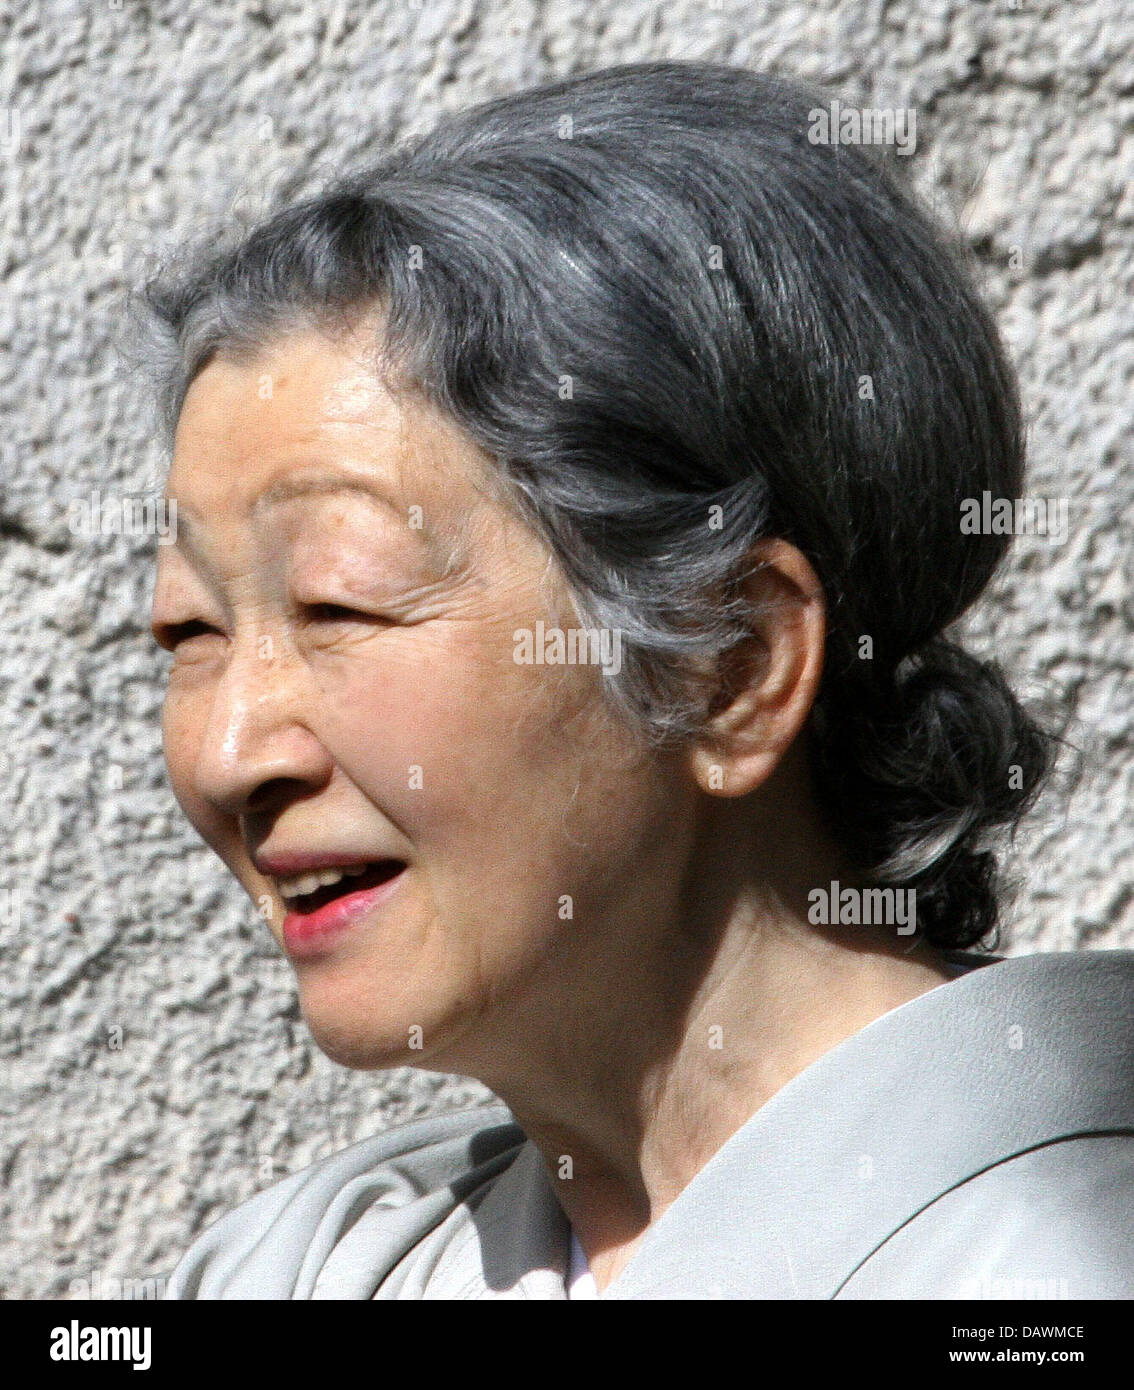 Empress Michiko of Japan pictured at the cathedral of Uppsala, Sweden, 23 May 2007. Emperor Aikhito of Japan and his wife Empress Michiko of Japan participated in the celebrations to the 300th anniversary of Swedish scientist Carl Linnaeus within the scope of their 2007 Visit to Europe. Photo: Albert Nieboer (NETHERLANDS OUT) Stock Photo